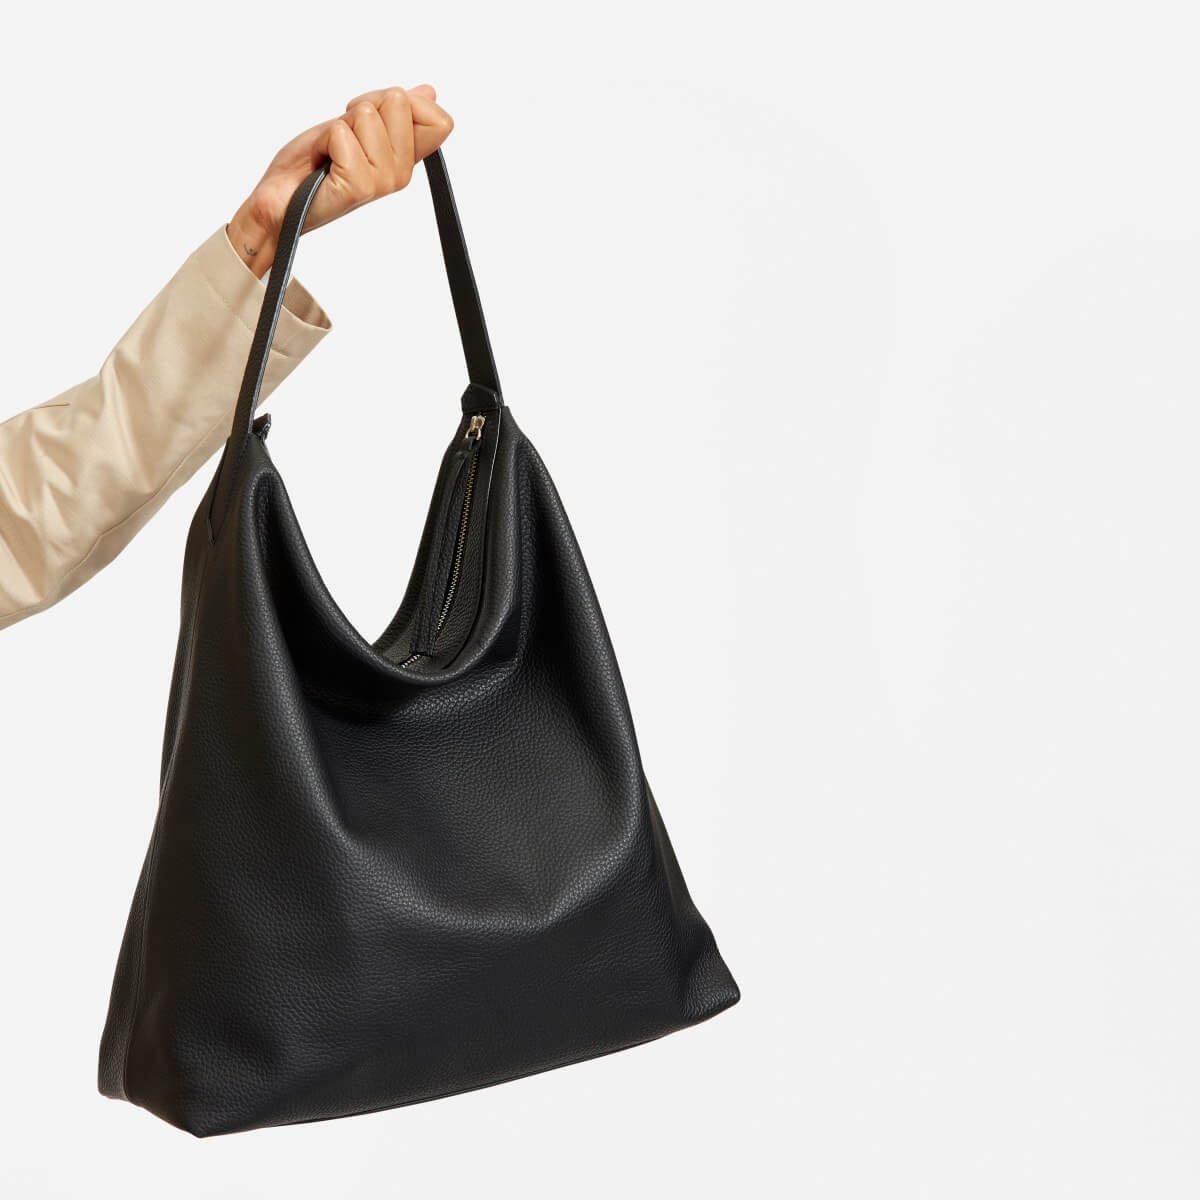 Everlane 'The Boss Bag' Review + A Holiday Giveaway! - Jeans and a Teacup